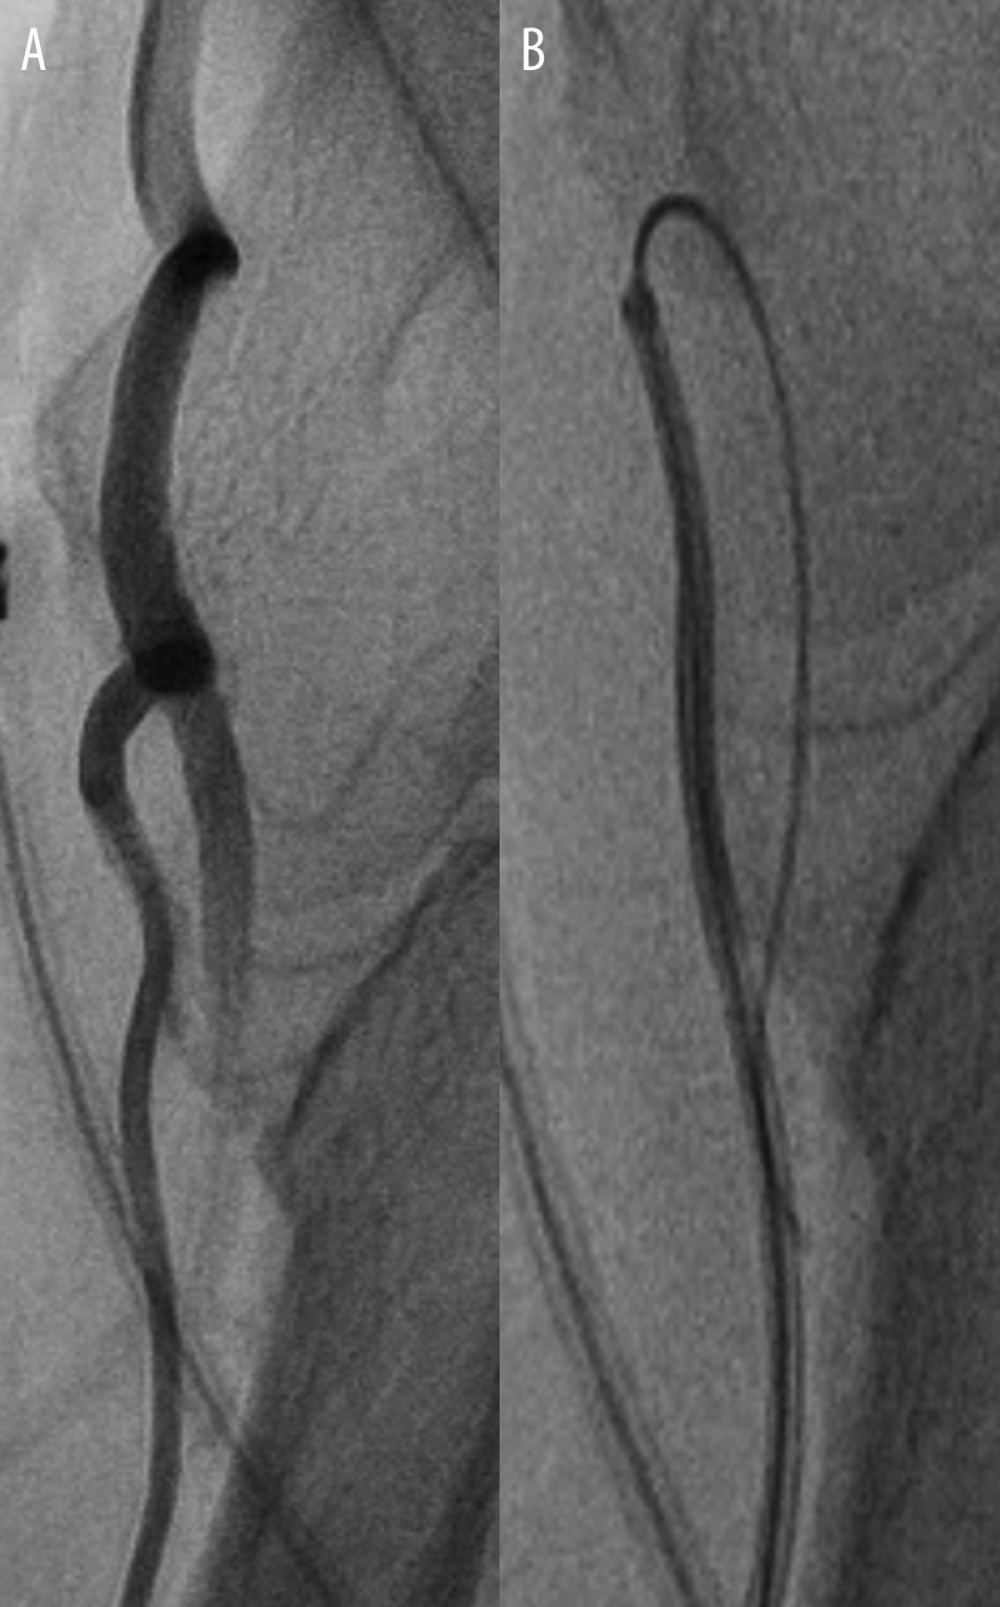 A case of tortuosity in the radial artery which could not be passed with the standard J-tip guidewire (A). The Radifocus wire had low steerability and torque transmission; therefore, it always chose the distal path (B). The Silverway wire was able to cross the tortuosity and reached the aortic valve in 19 seconds (no image available).